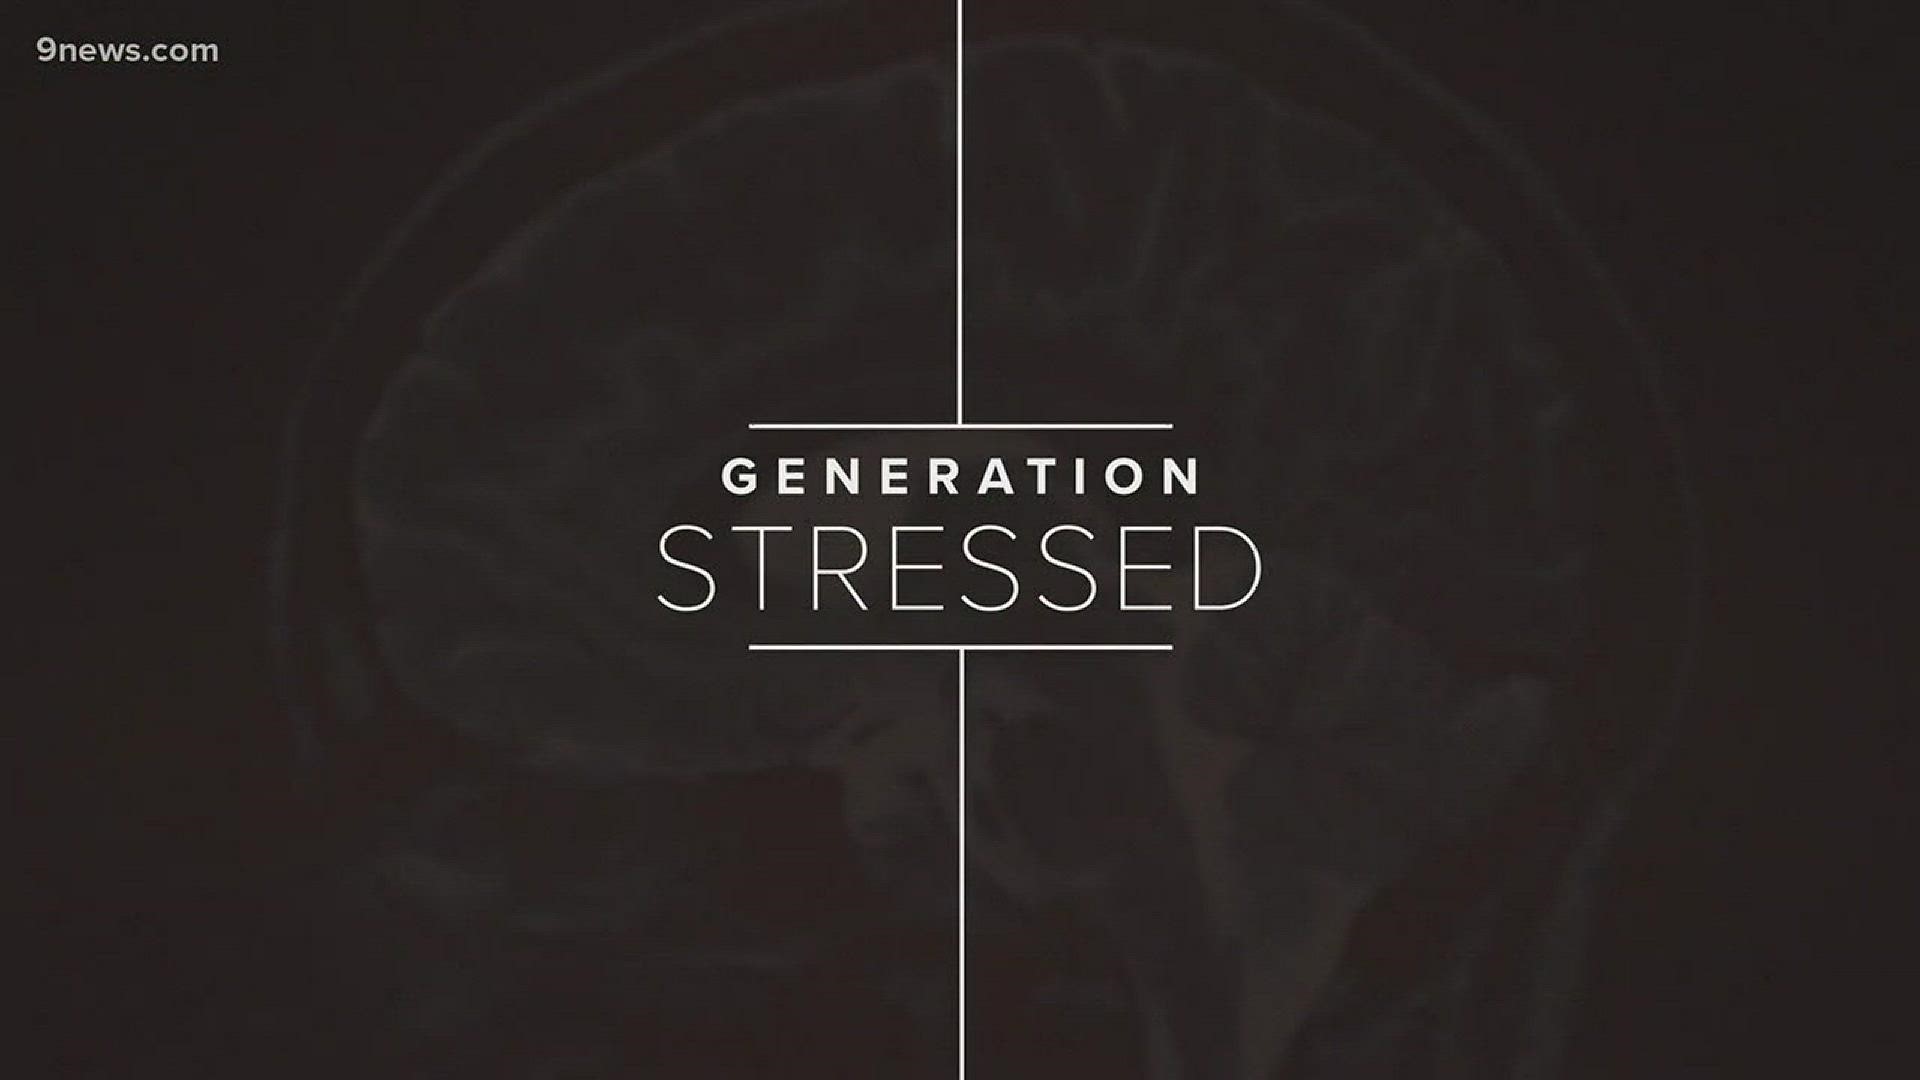 We're diving into the biggest stressors for each generation all this week. This Monday, we're checking on Gen Z - the generation born after 1996. The main worry for the youngest generation focuses on gun violence.